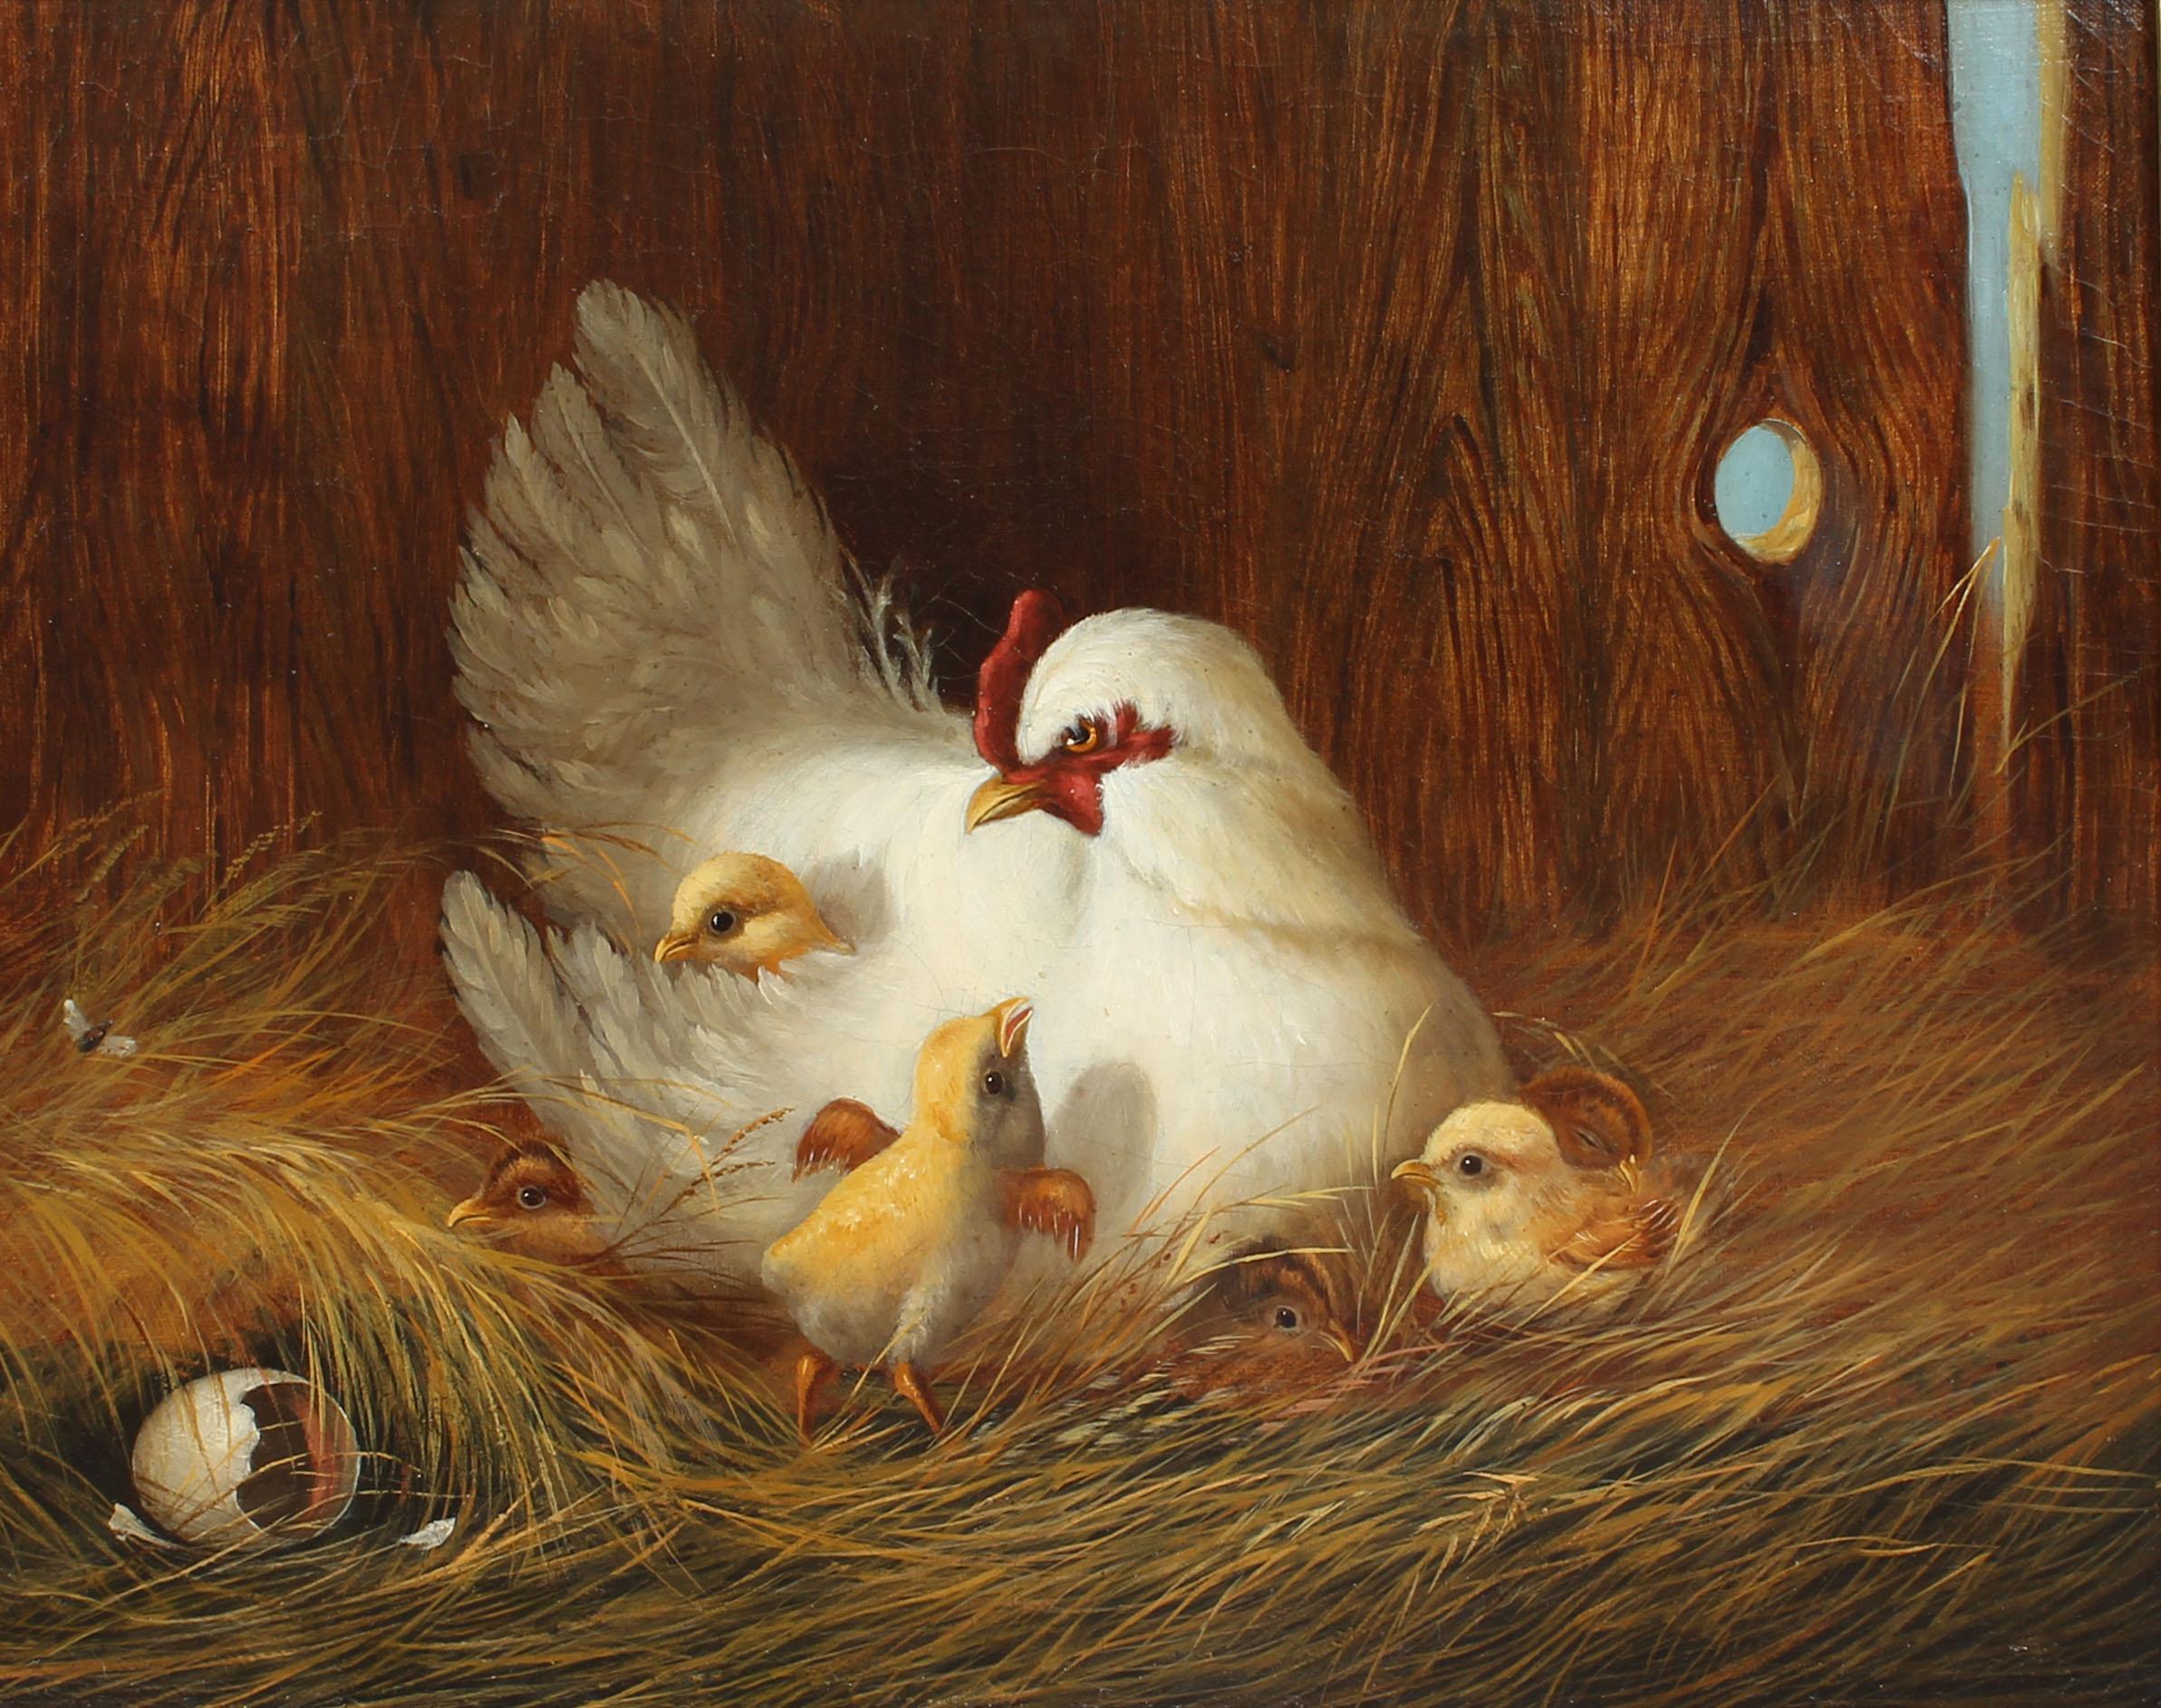 Antique American School Realist 19th Century Chicken Barn Animal Oil Painting - Brown Animal Painting by Unknown